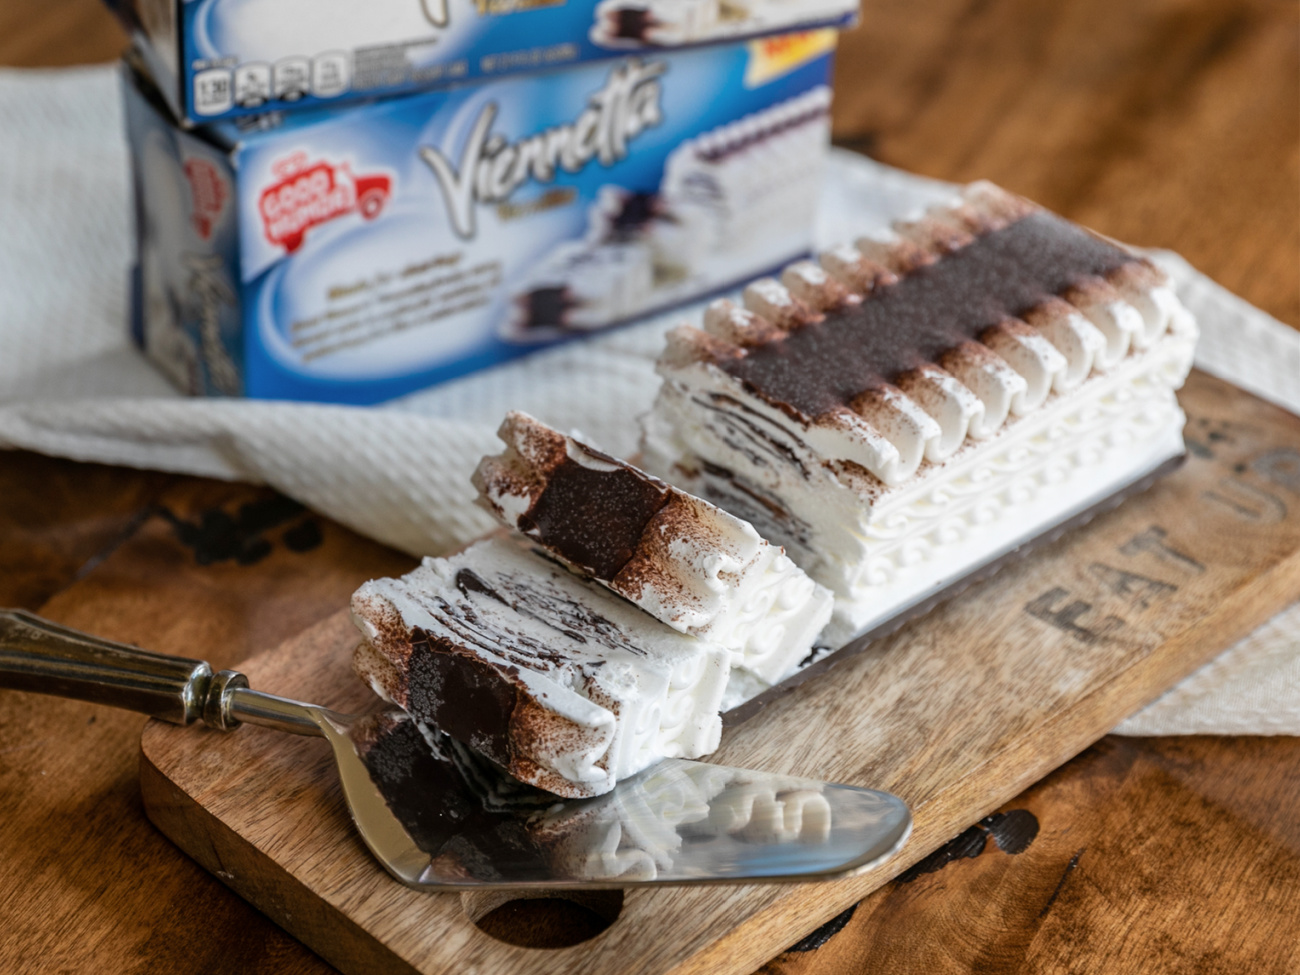 Big Savings On The Delicious Good Humor Viennetta Cake – $3 Off At Publix